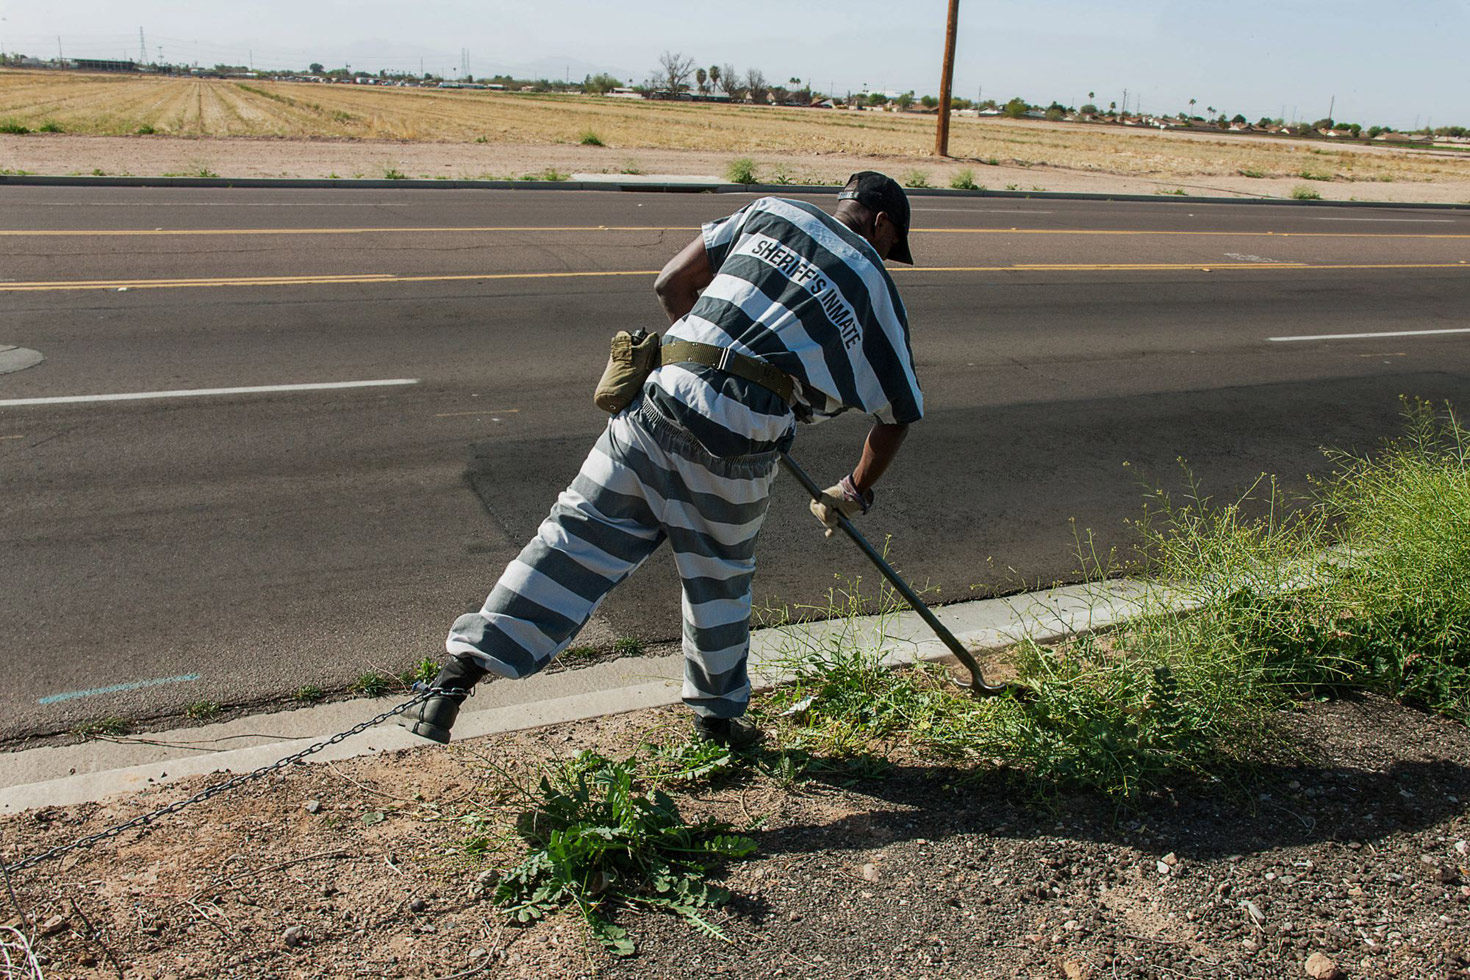 A chain gang inmate performs weeding duties in the Phoenix area.